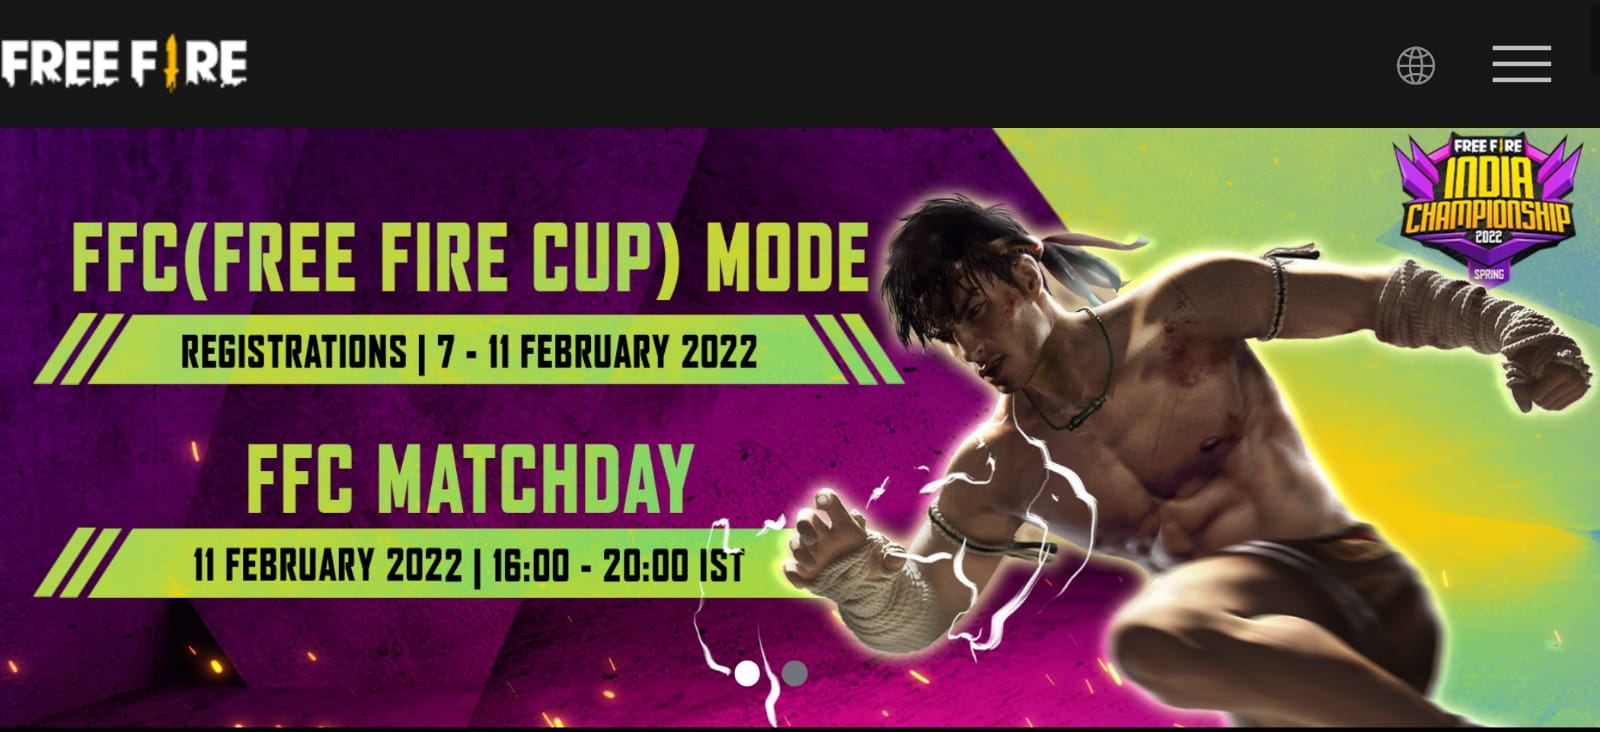 Free Fire India Championship 2022 Spring FFC Mode Details: All you need to know about the FFC mode of FFIC 2022 Spring